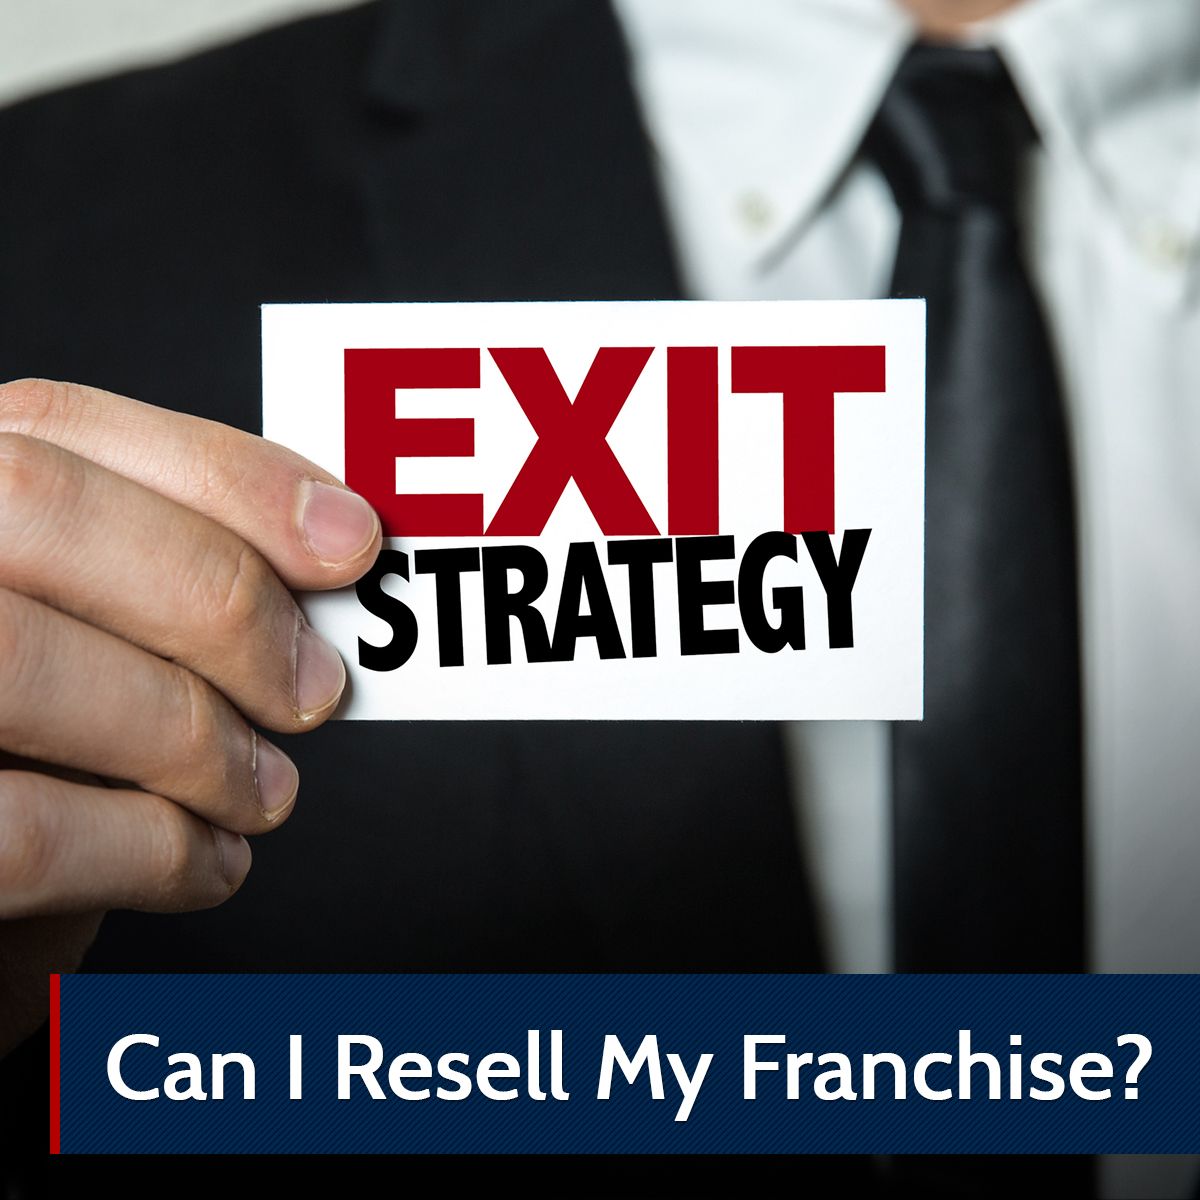 Can I Resell My Franchise?